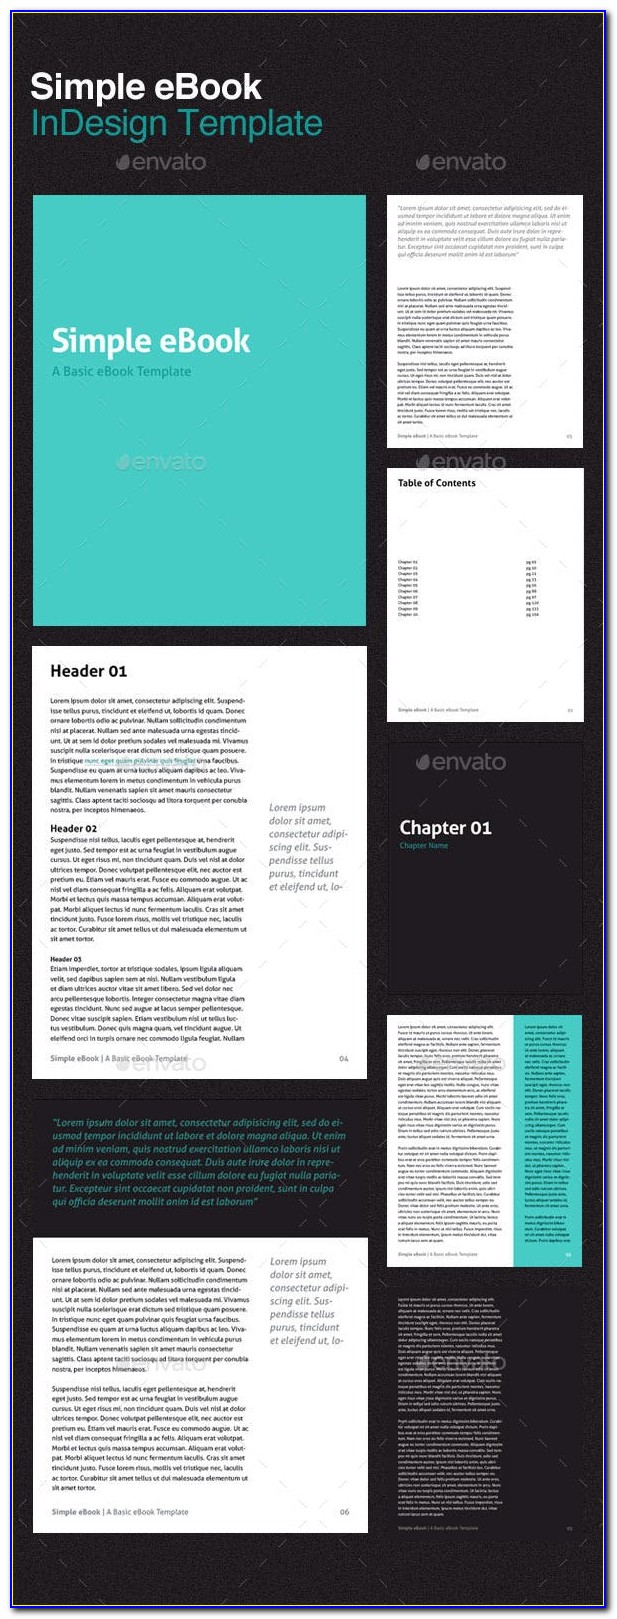 Indesign Ebook Template Free Download